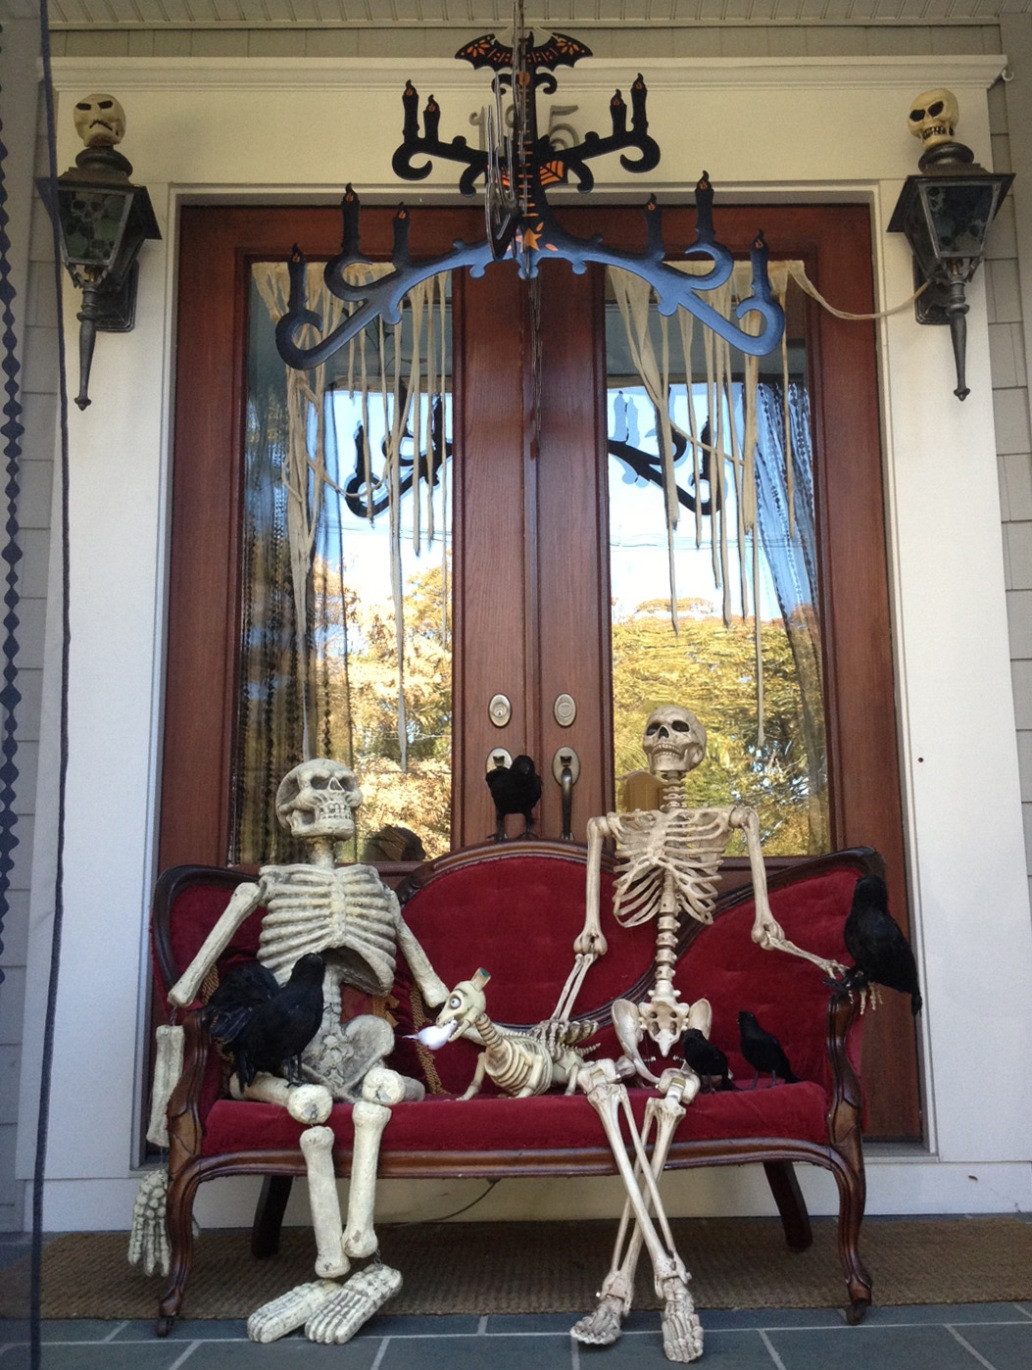 Halloween Outdoor Decorating Ideas
 Cute Halloween Front Porch Decorations to Greet Your Guests